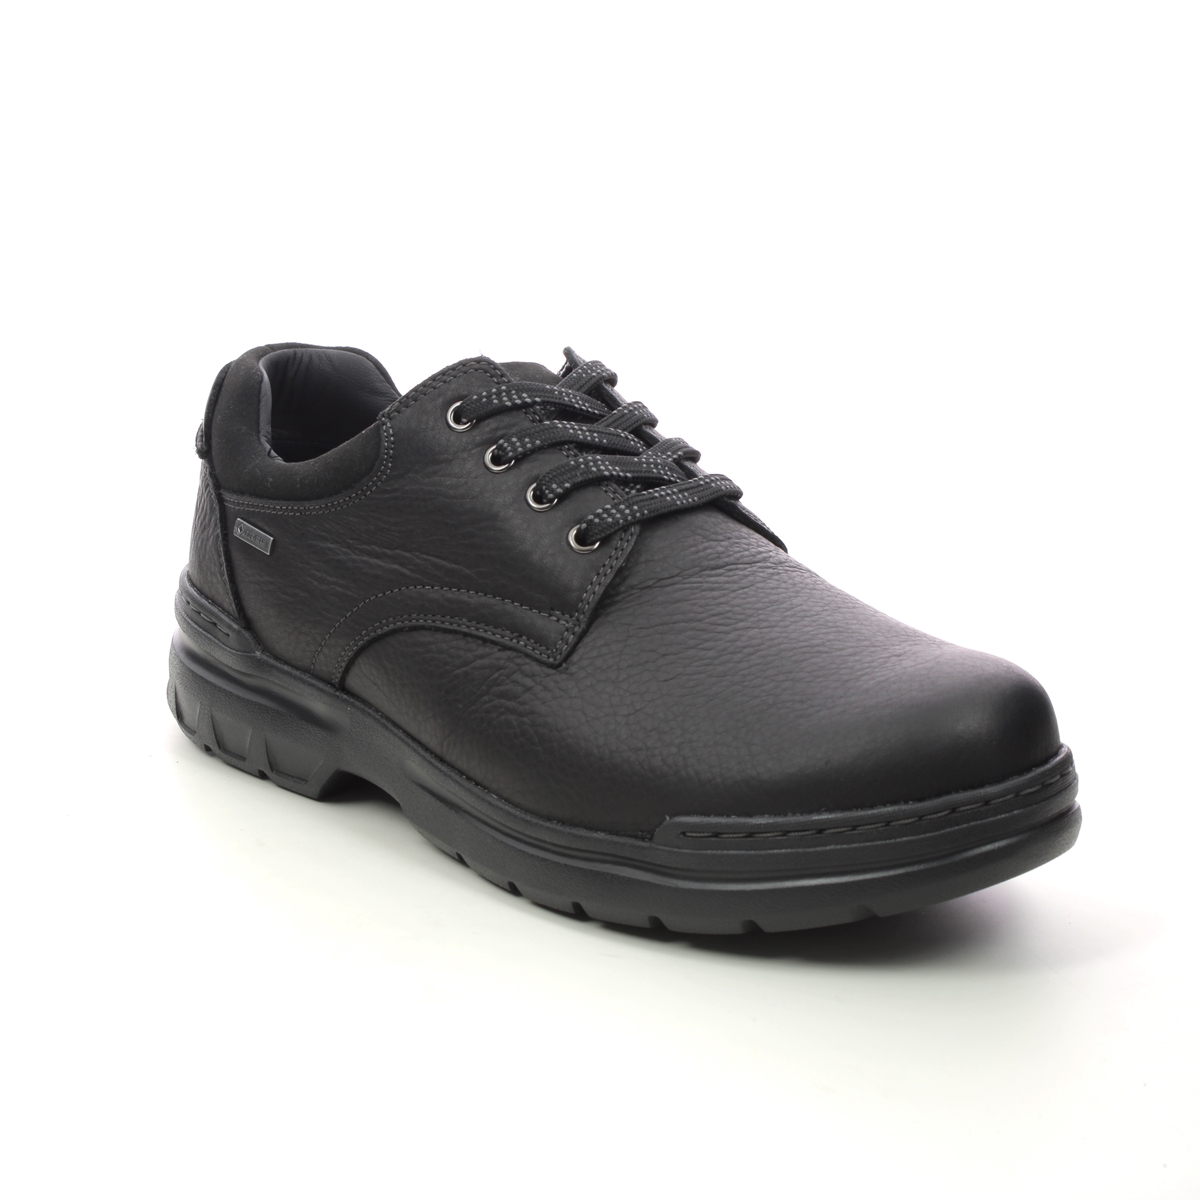 Clarks Rockie Walk Gtx Black Leather Mens Comfort Shoes 734648H In Size 10 In Plain Black Leather H Width Fitting Extra Wide